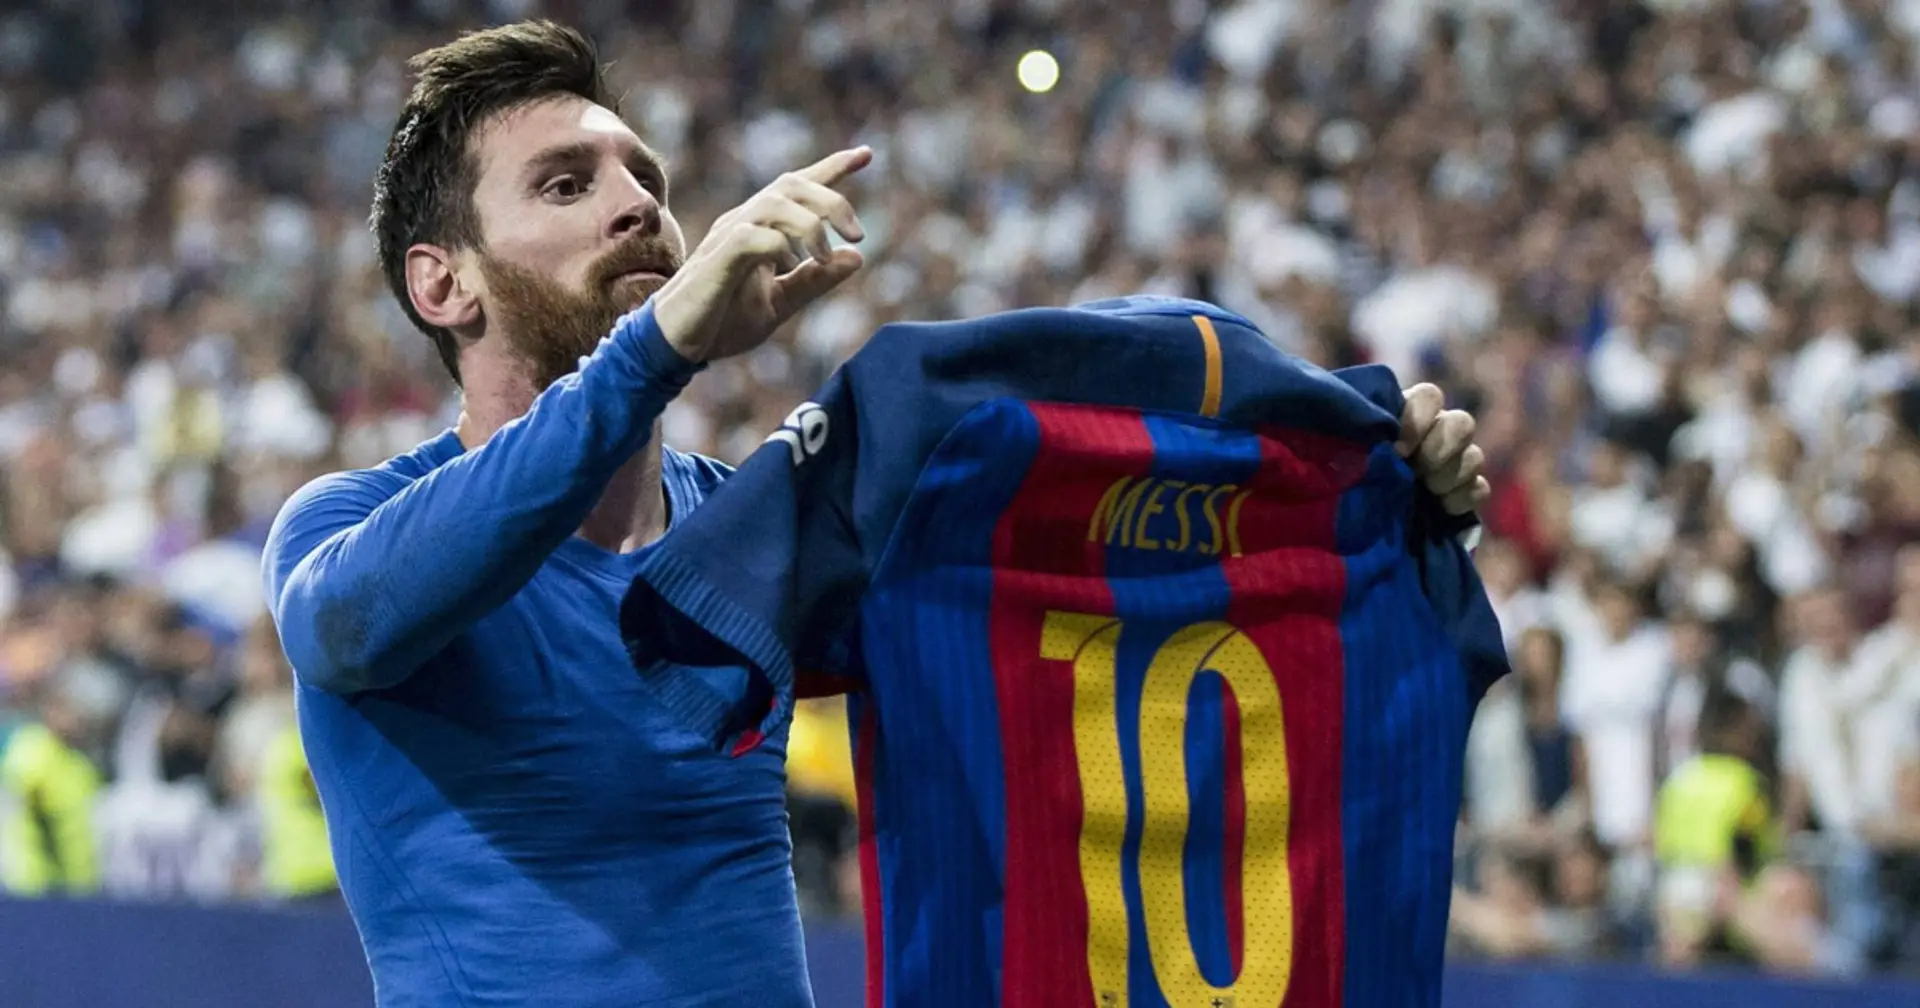 Messi's Clasico jersey sells for 400K and 3 more under-radar stories of the day at Barca